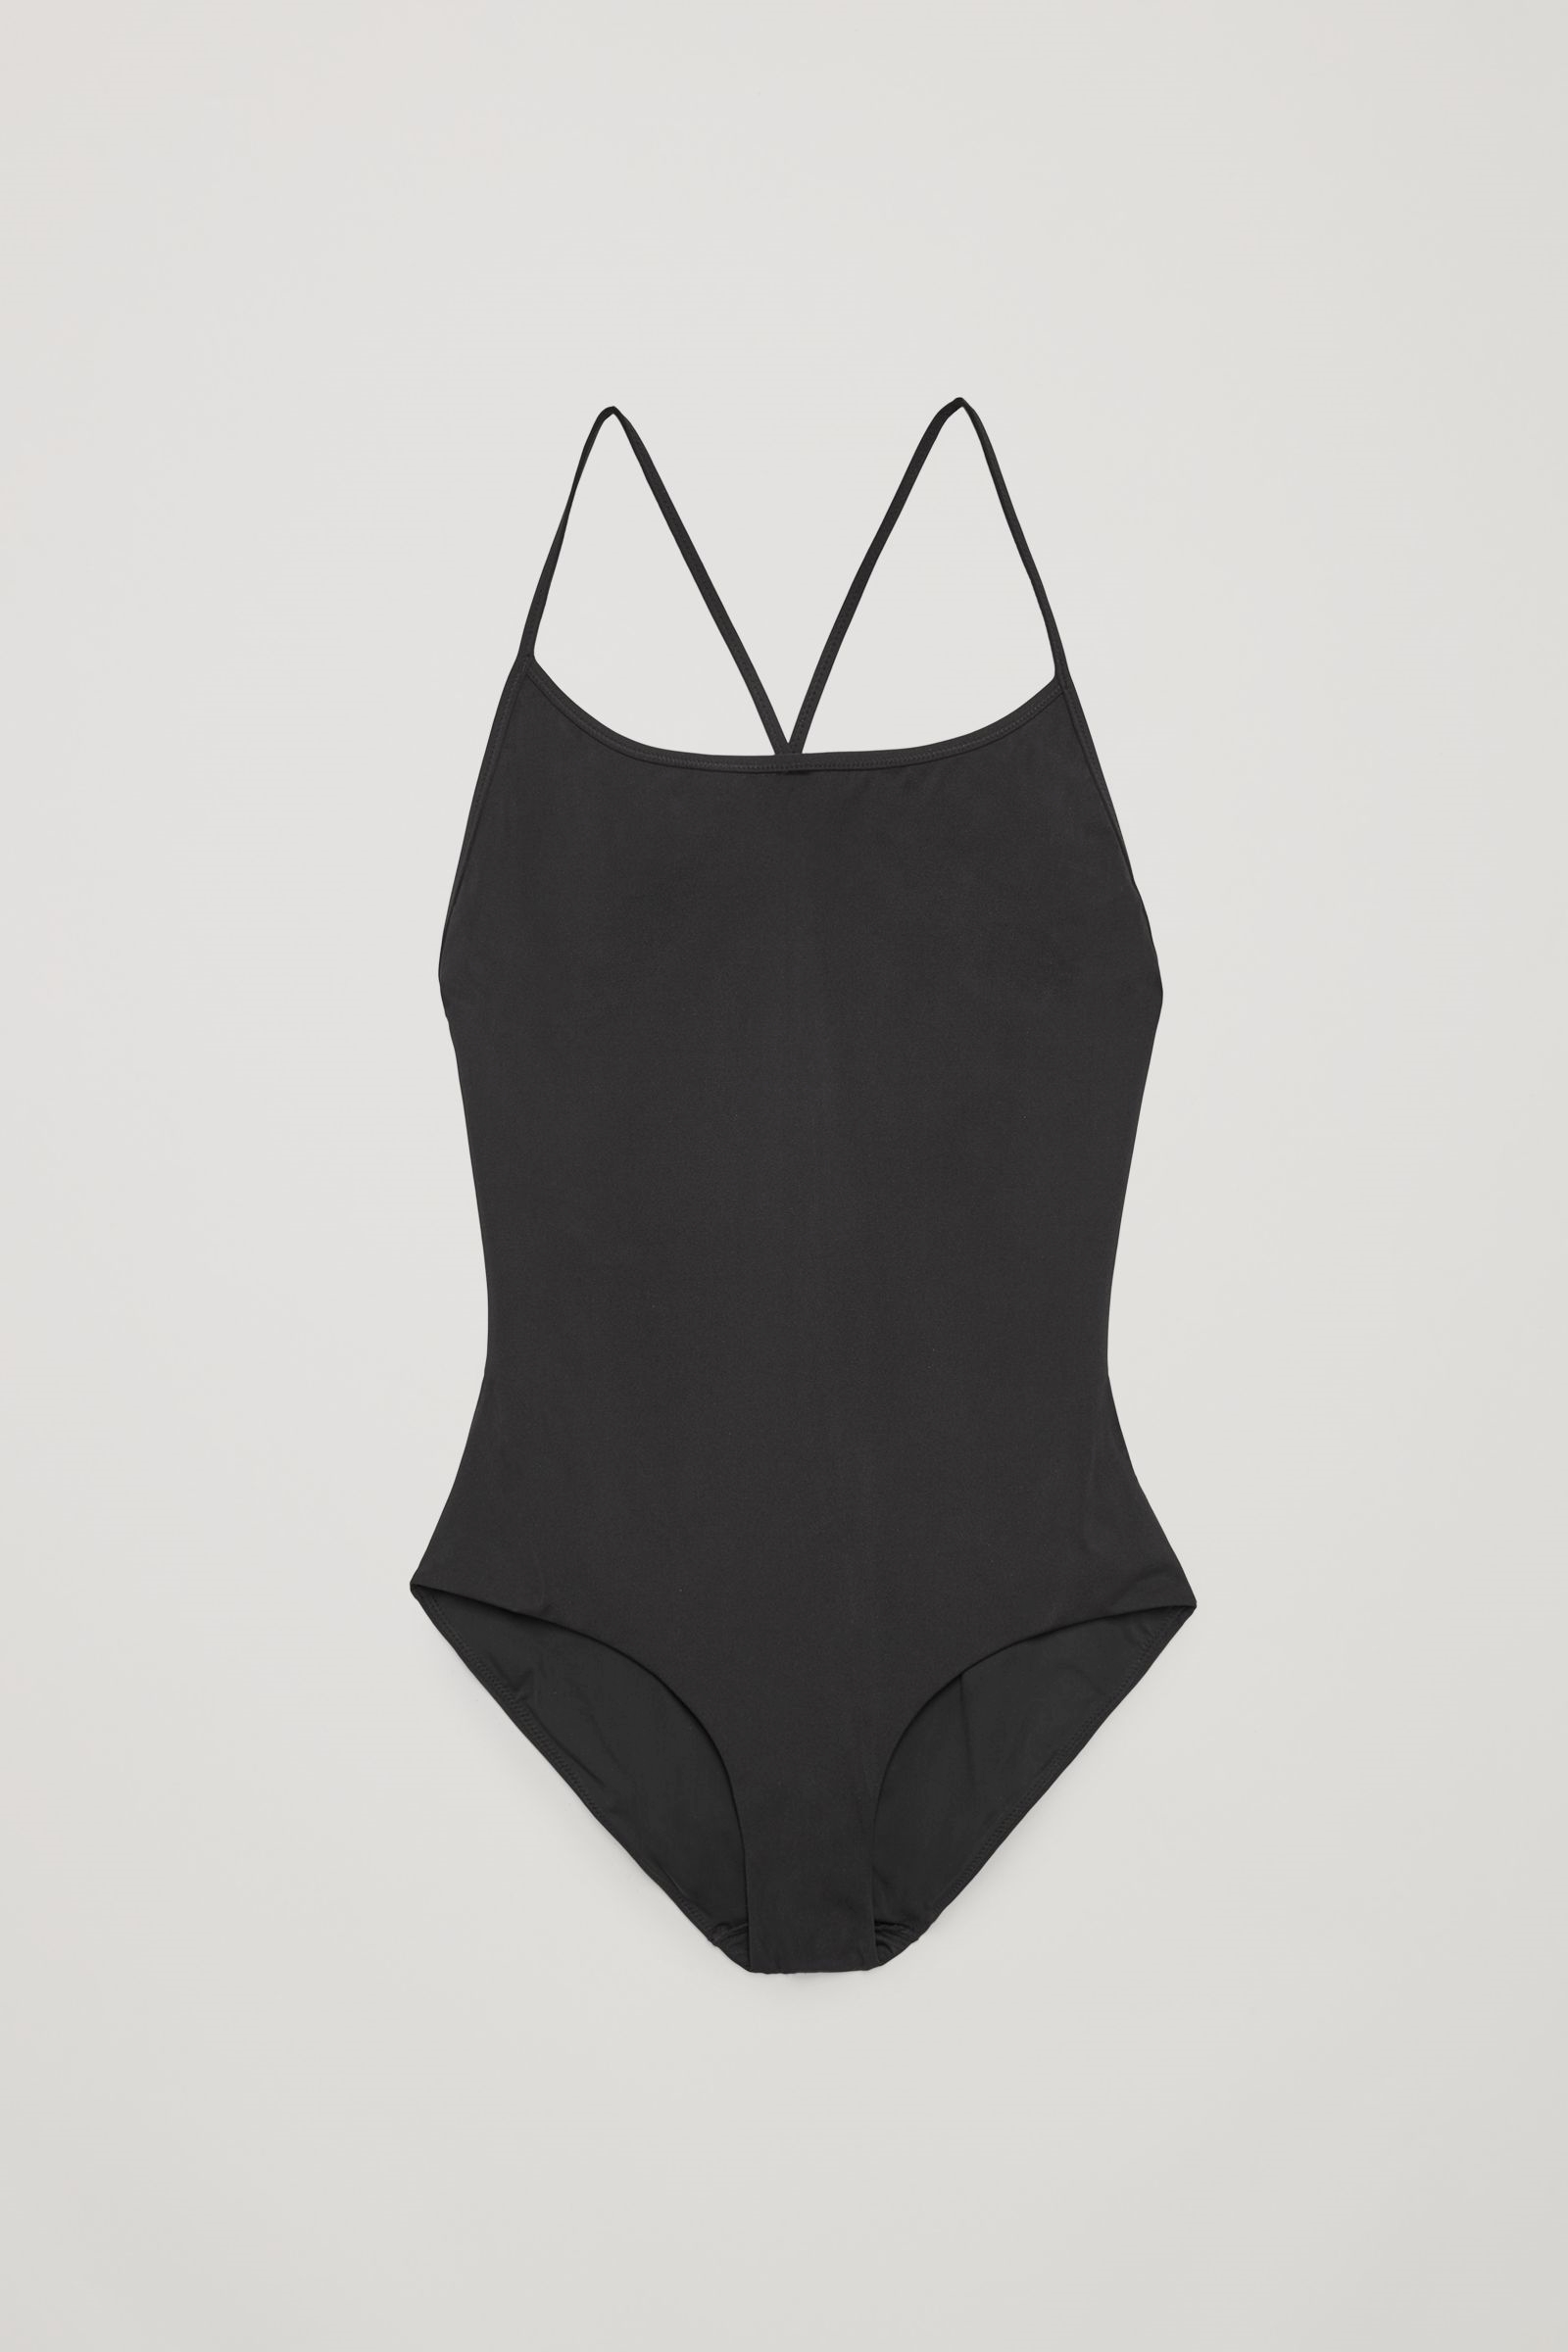 7 Places To Buy Swimwear Online That You’ll Wish You Knew About Sooner ...